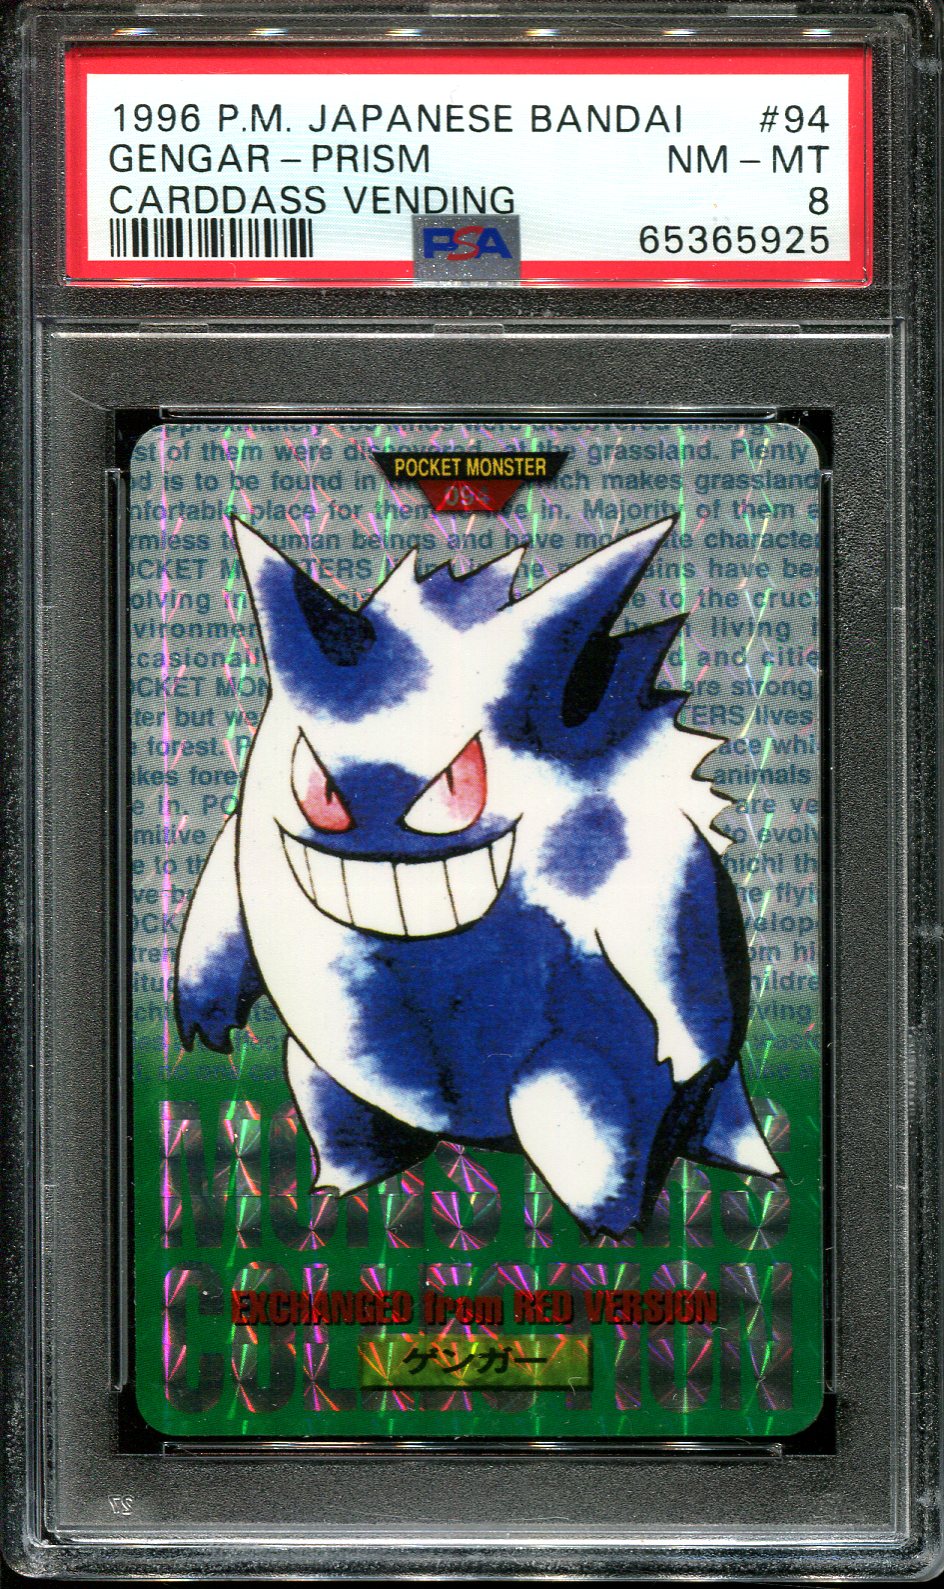 GENGAR 094 PSA 8 POKEMON CARDDASS VENDING GREEN MONSTERS COLLECTION JAPANESE HOLO